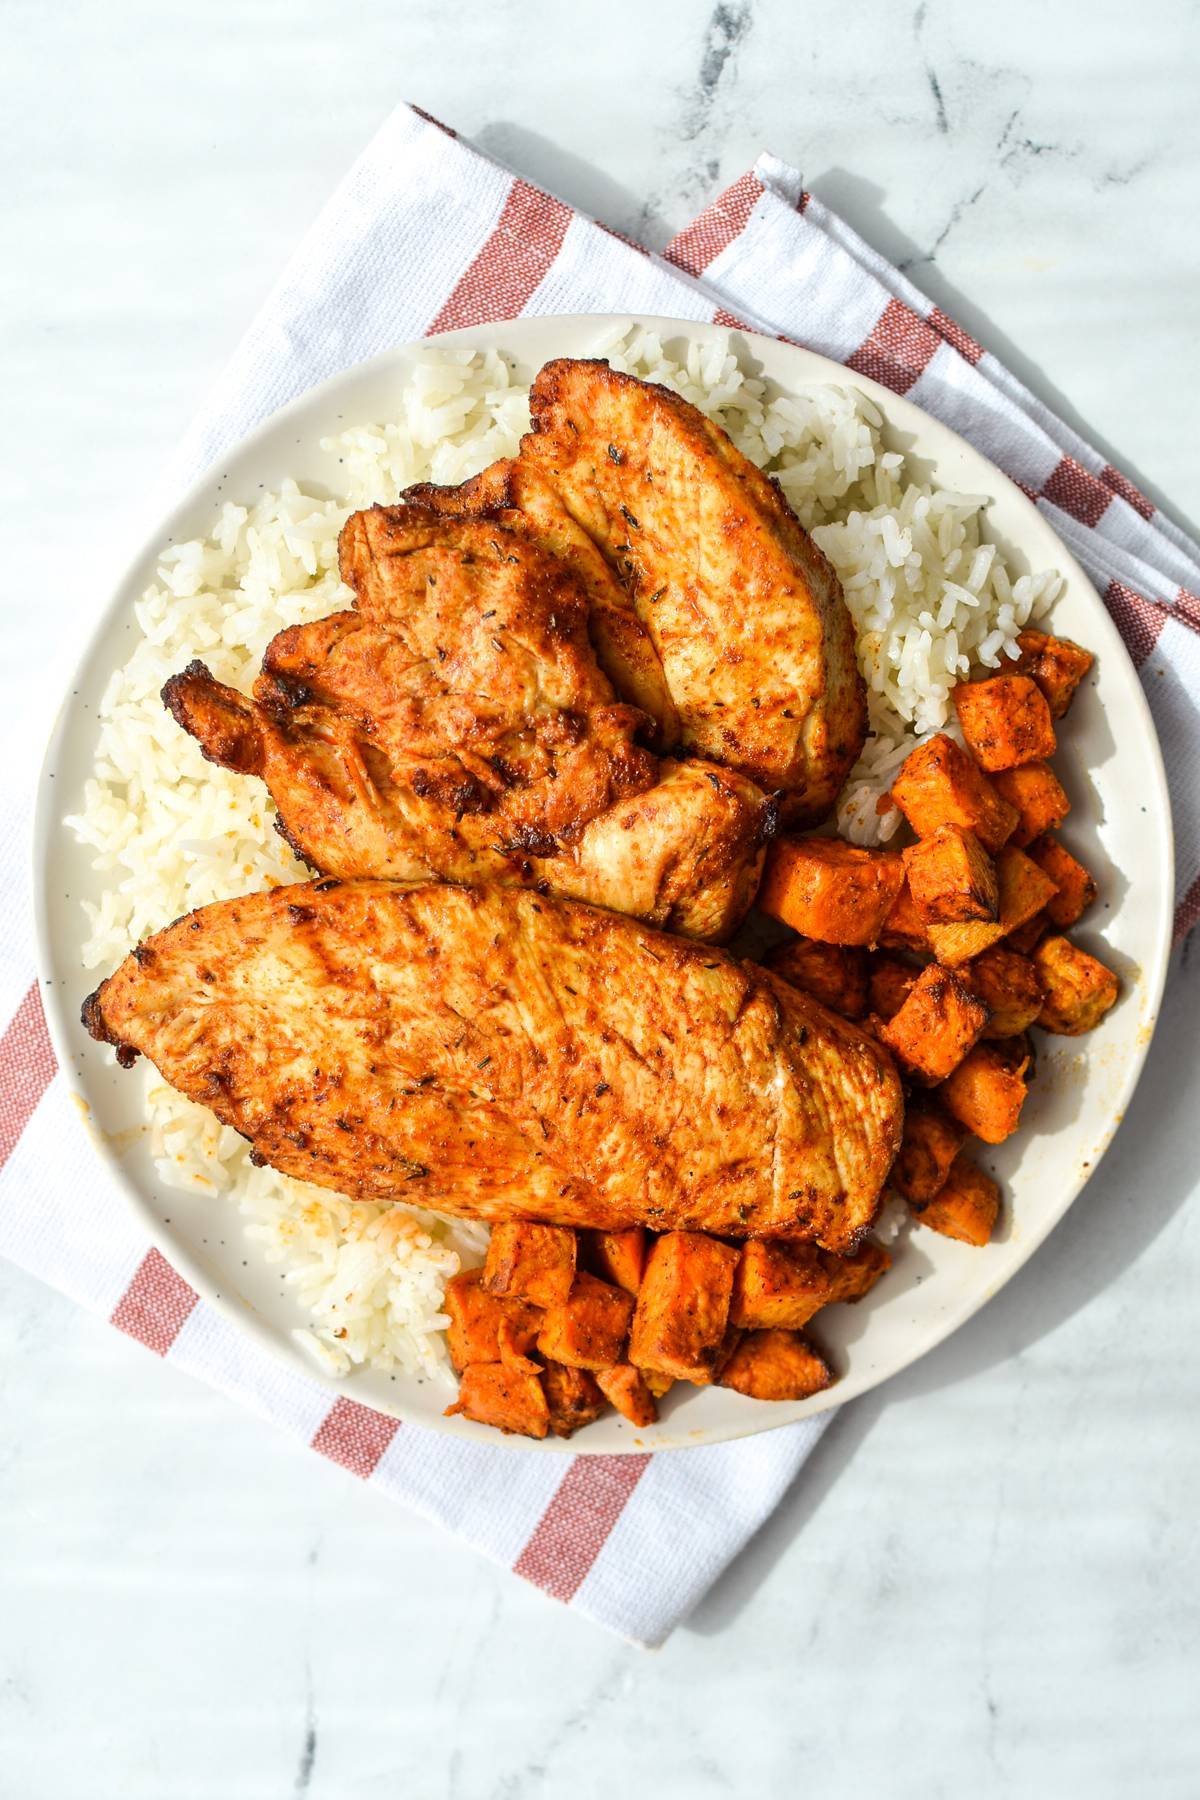 A plate filled with rice, sweet potatoes, and blackened chicken.